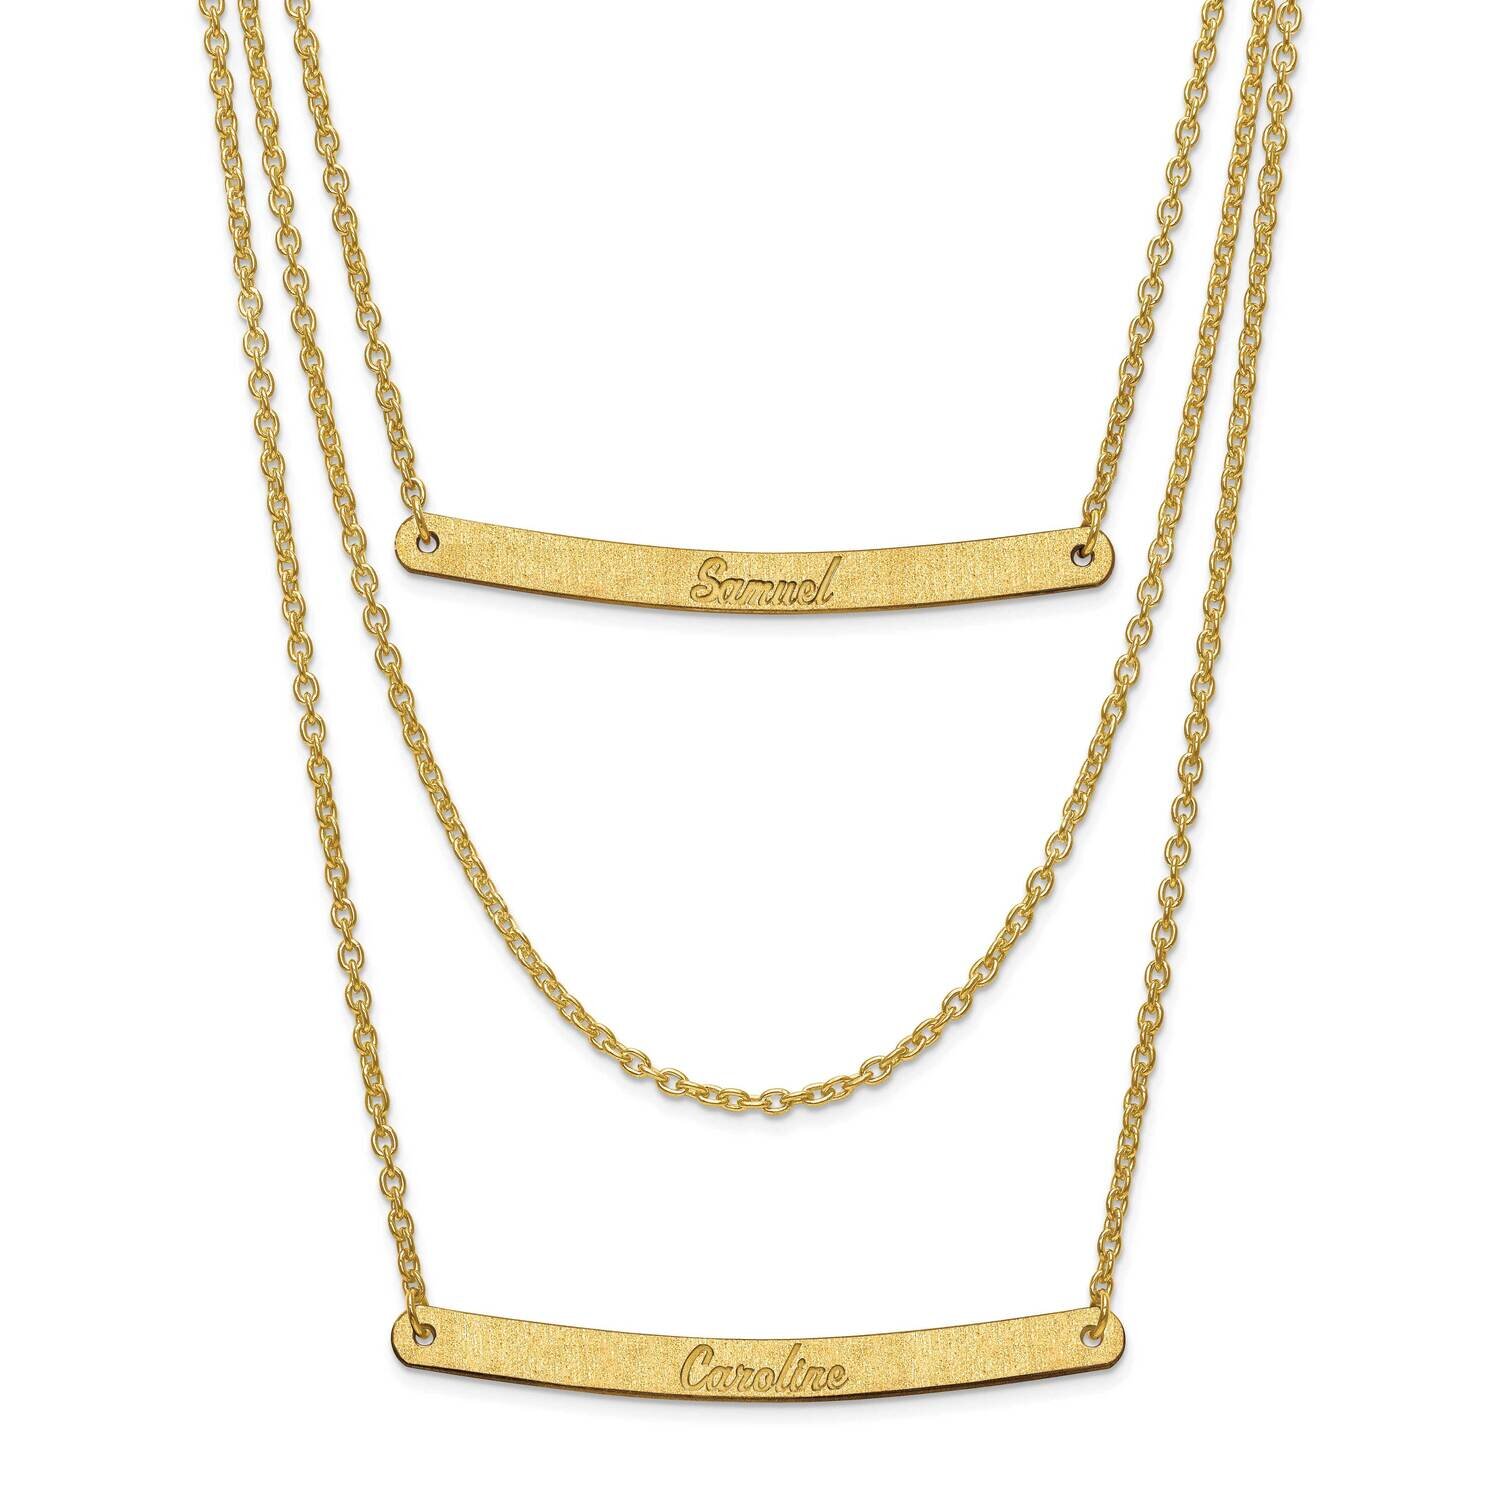 Brushed 3 Chain 2 Bar Name Necklace Gold-plated Silver XNA652GP